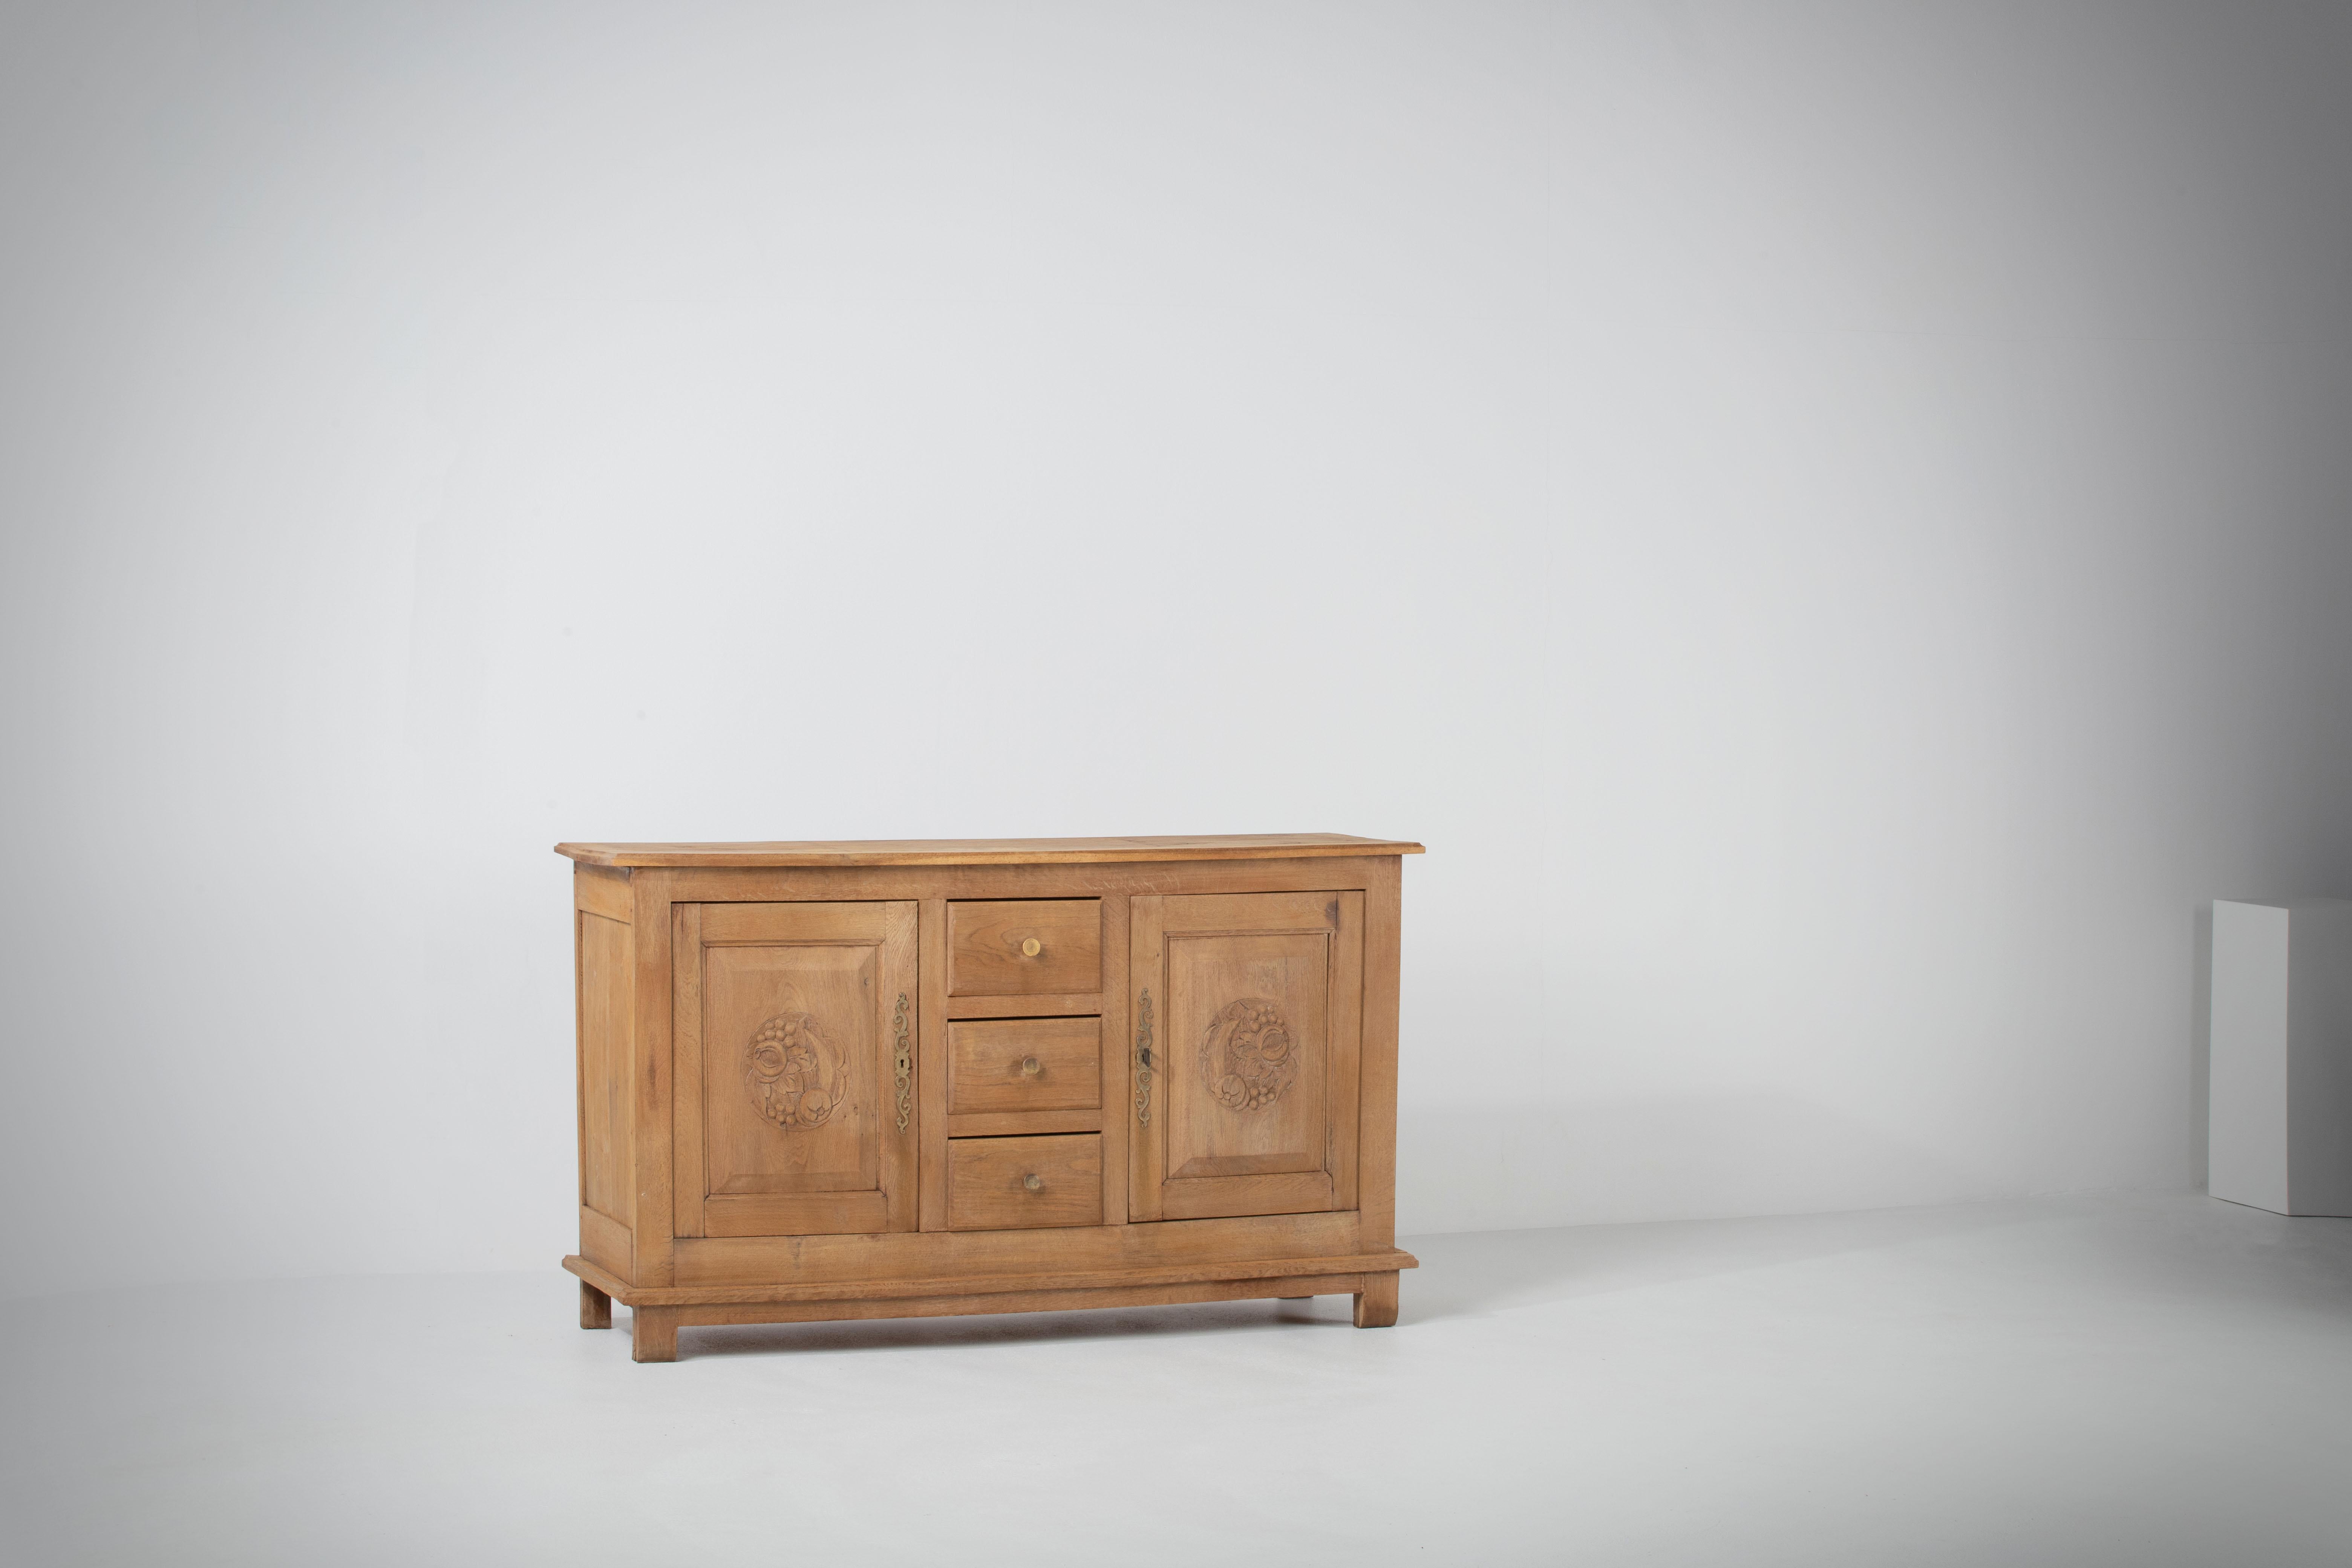 Very elegant credenza in solid oak, France, 1940s.
Art Deco Brutalist sideboard. 
The credenza consists of Two storage facilities covered with hand-carved designed doors and a column of drawers.
The refined wooden structures on the doors create a